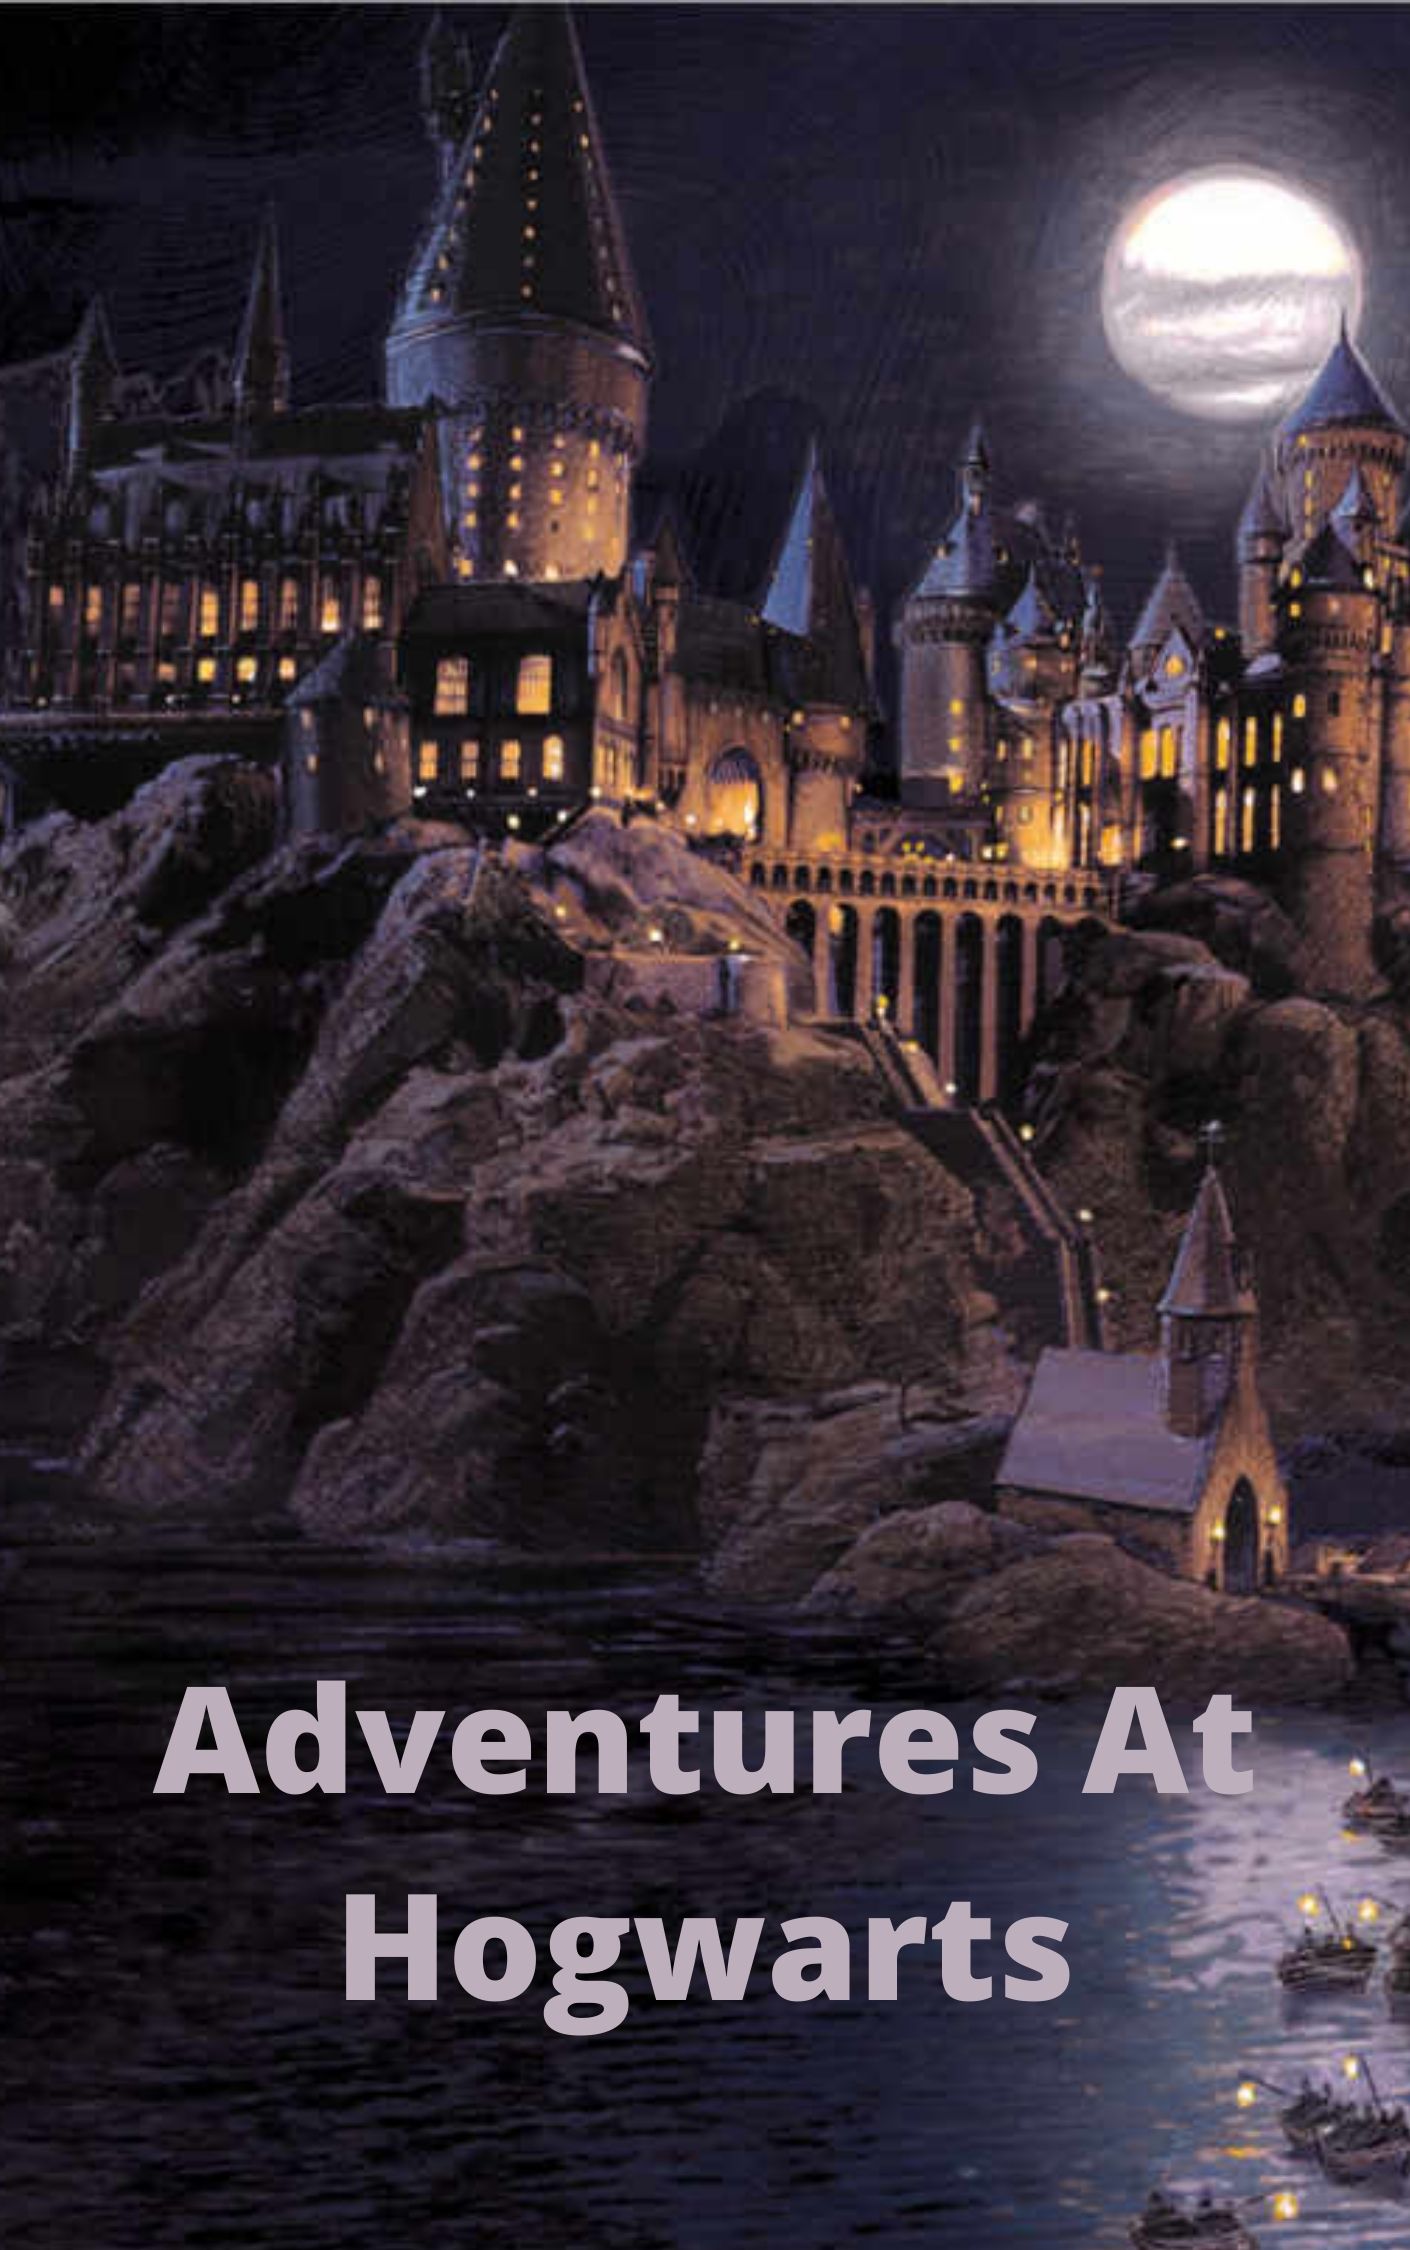 review-hogwarts-is-here-ireland-s-news-reviews-source-for-all-things-geek-and-gamer